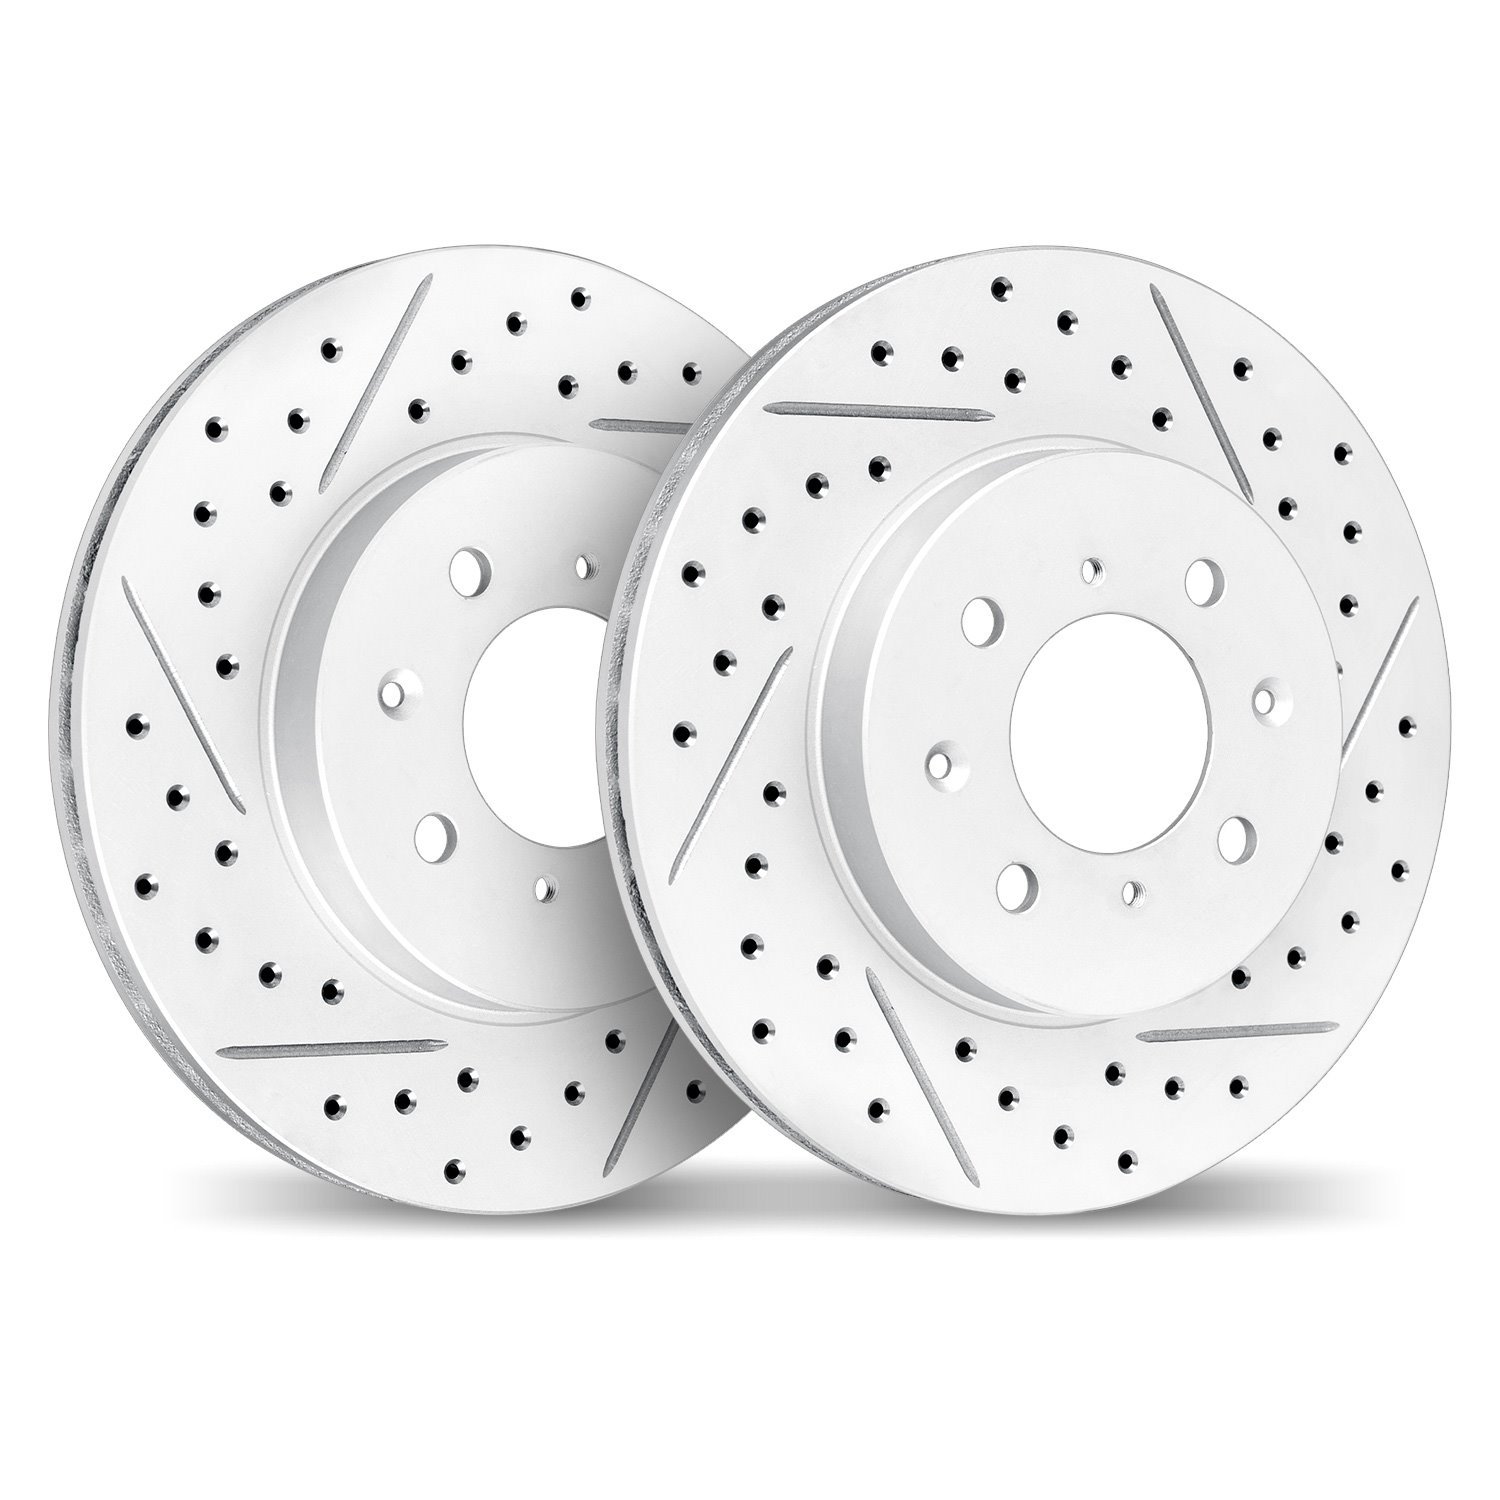 2002-47008 Geoperformance Drilled/Slotted Brake Rotors, 2004-2017 GM, Position: Front